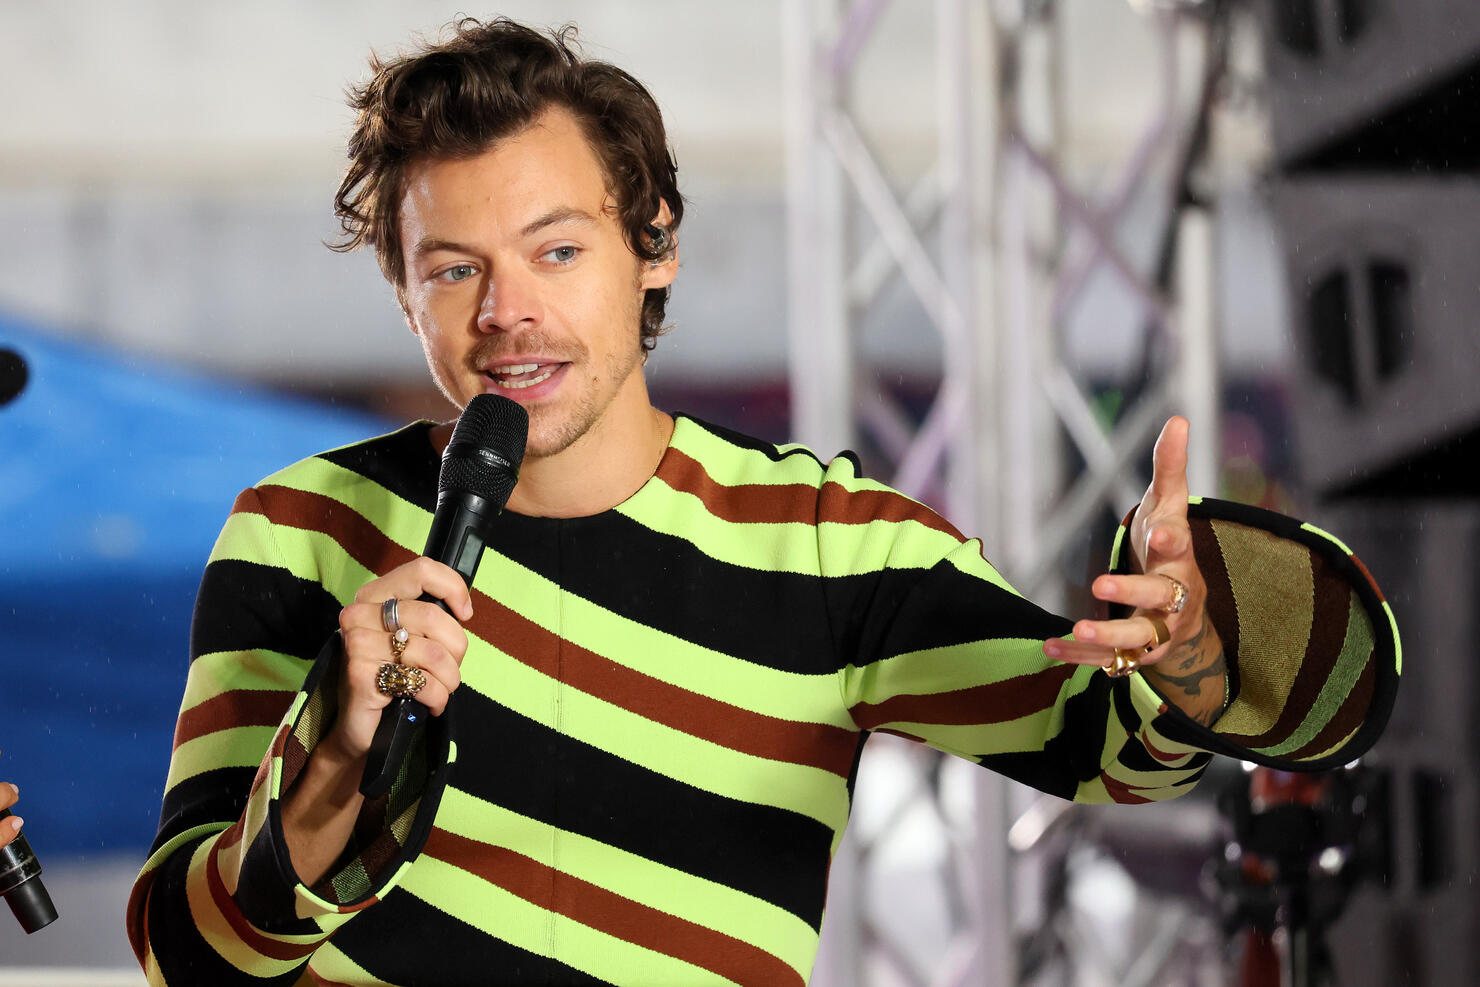 Harry Styles' Best Fashion Moments